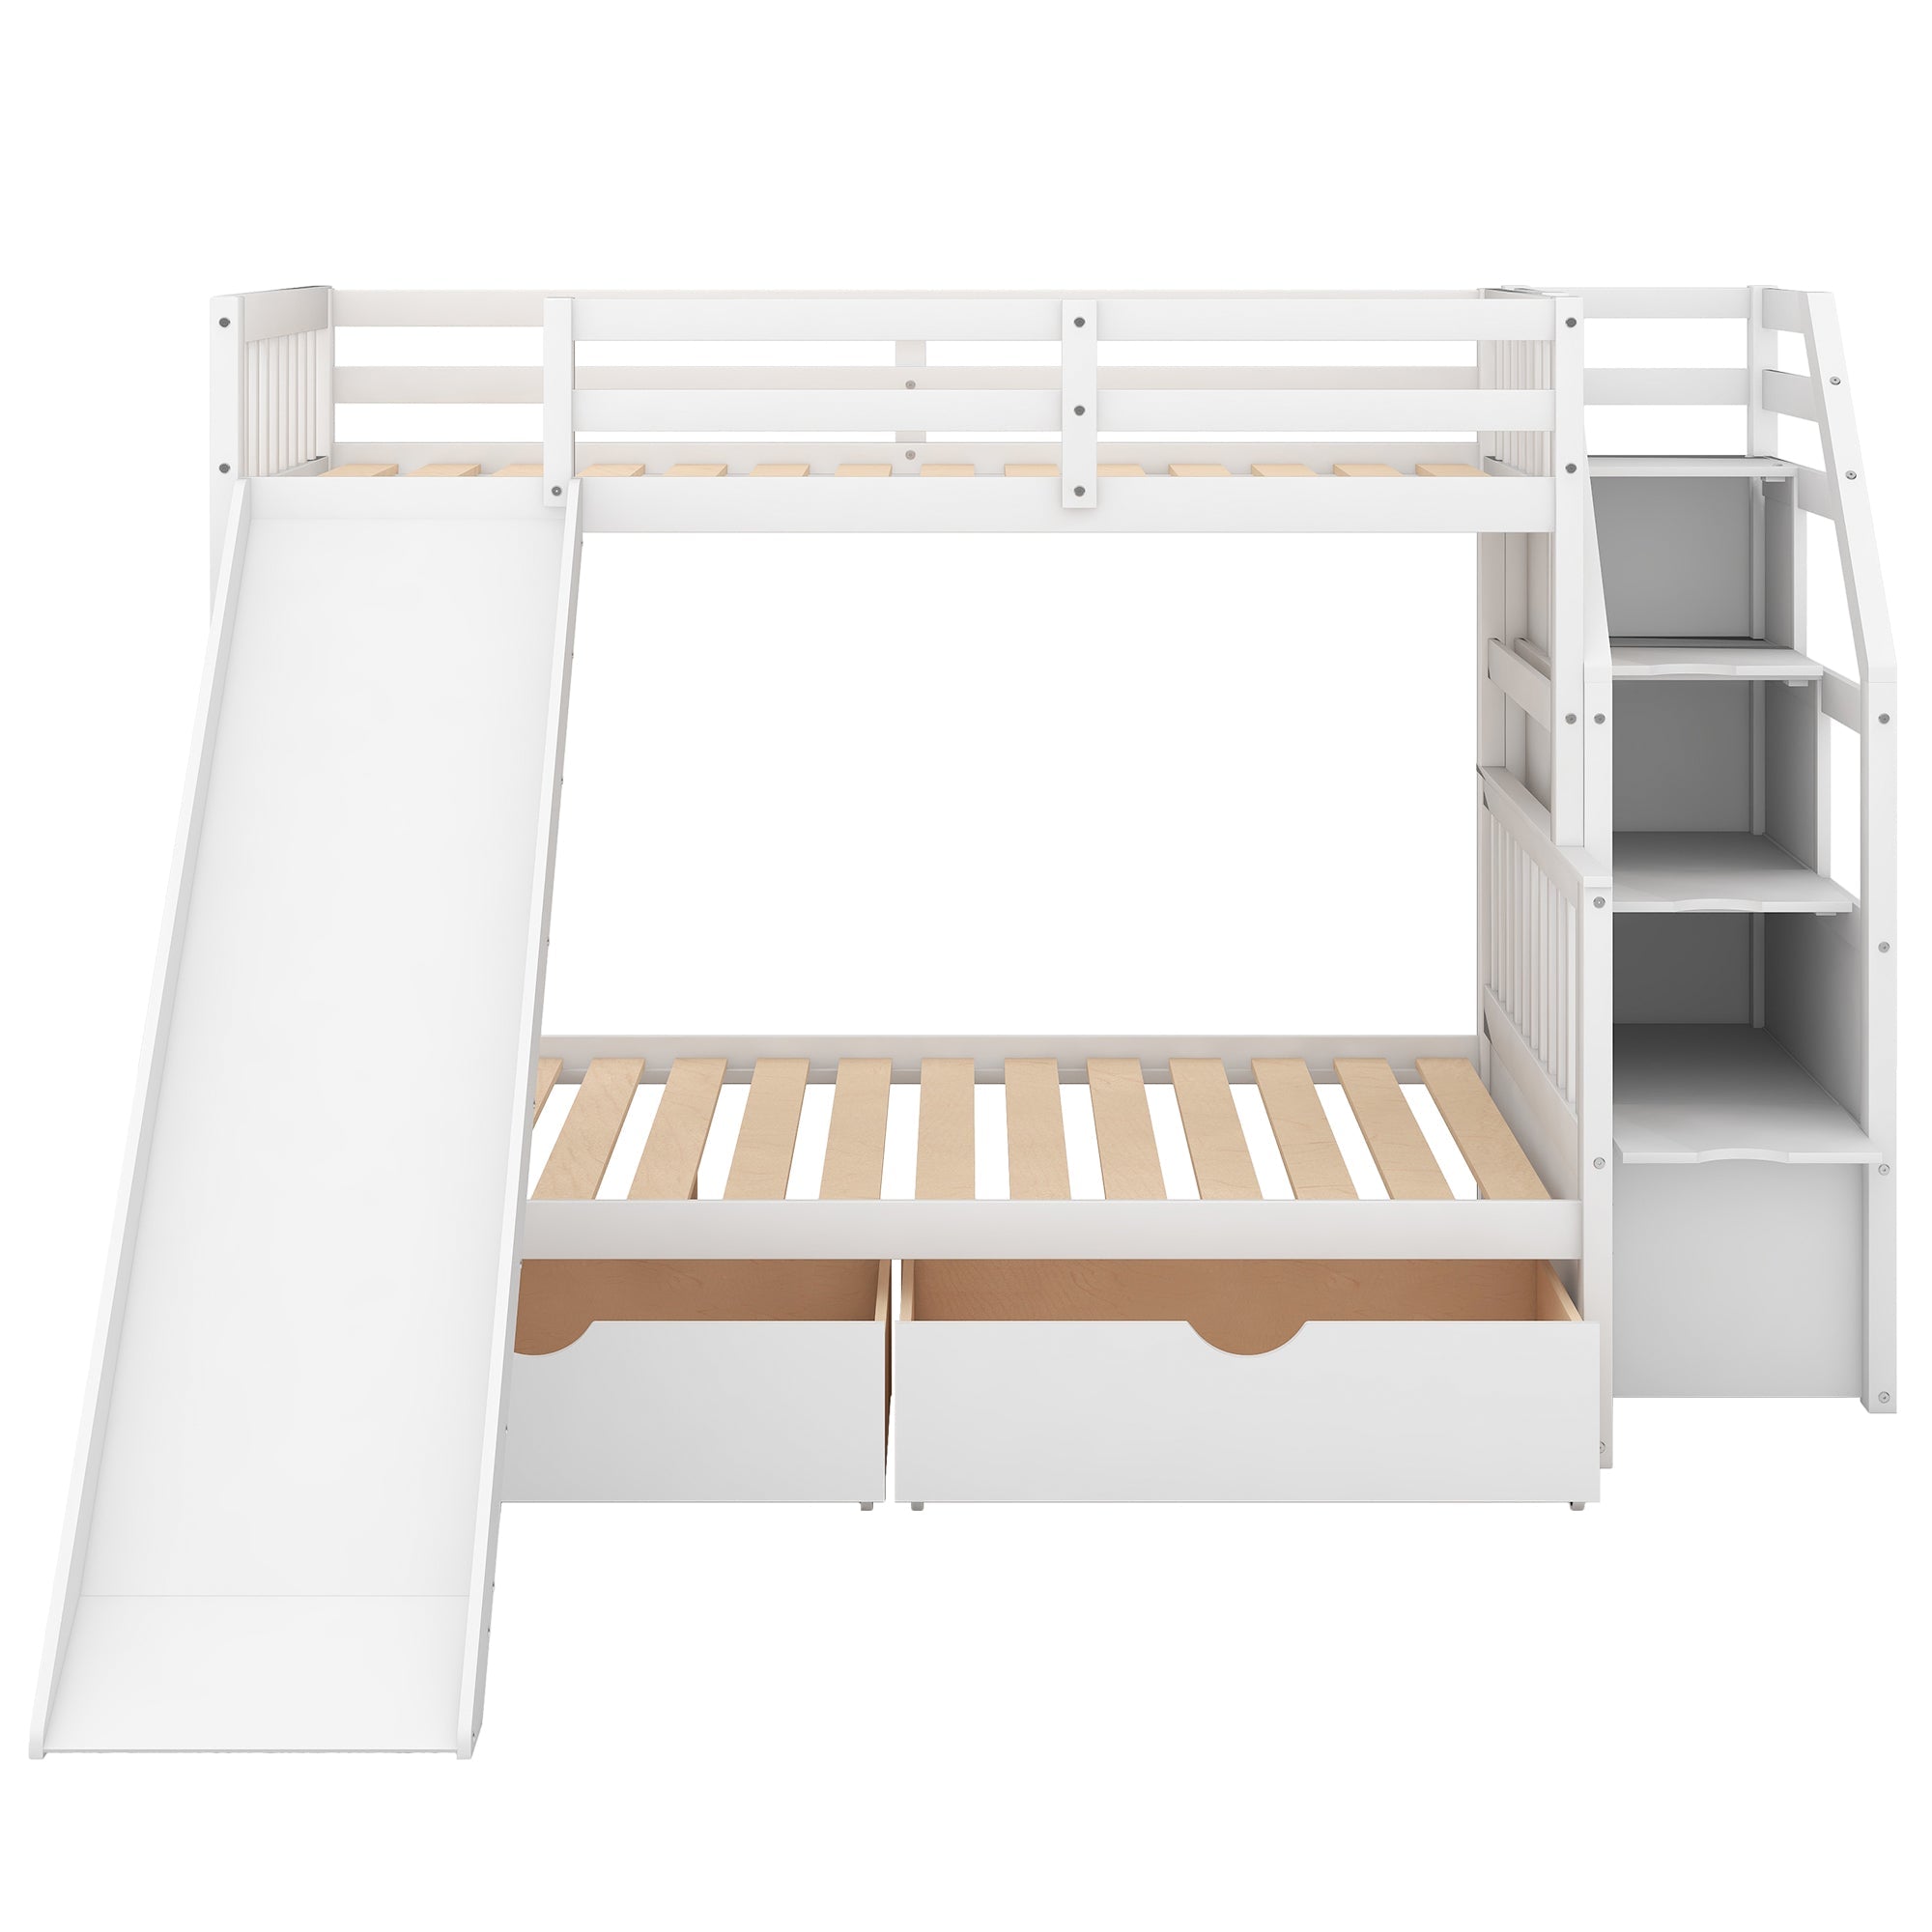 Bellemave Twin Over Full Bunk Bed with Stairs and Slide, Solid Wood Bunk Bed Frame with Storage Drawers for Kids Boys Girls Teens （White)